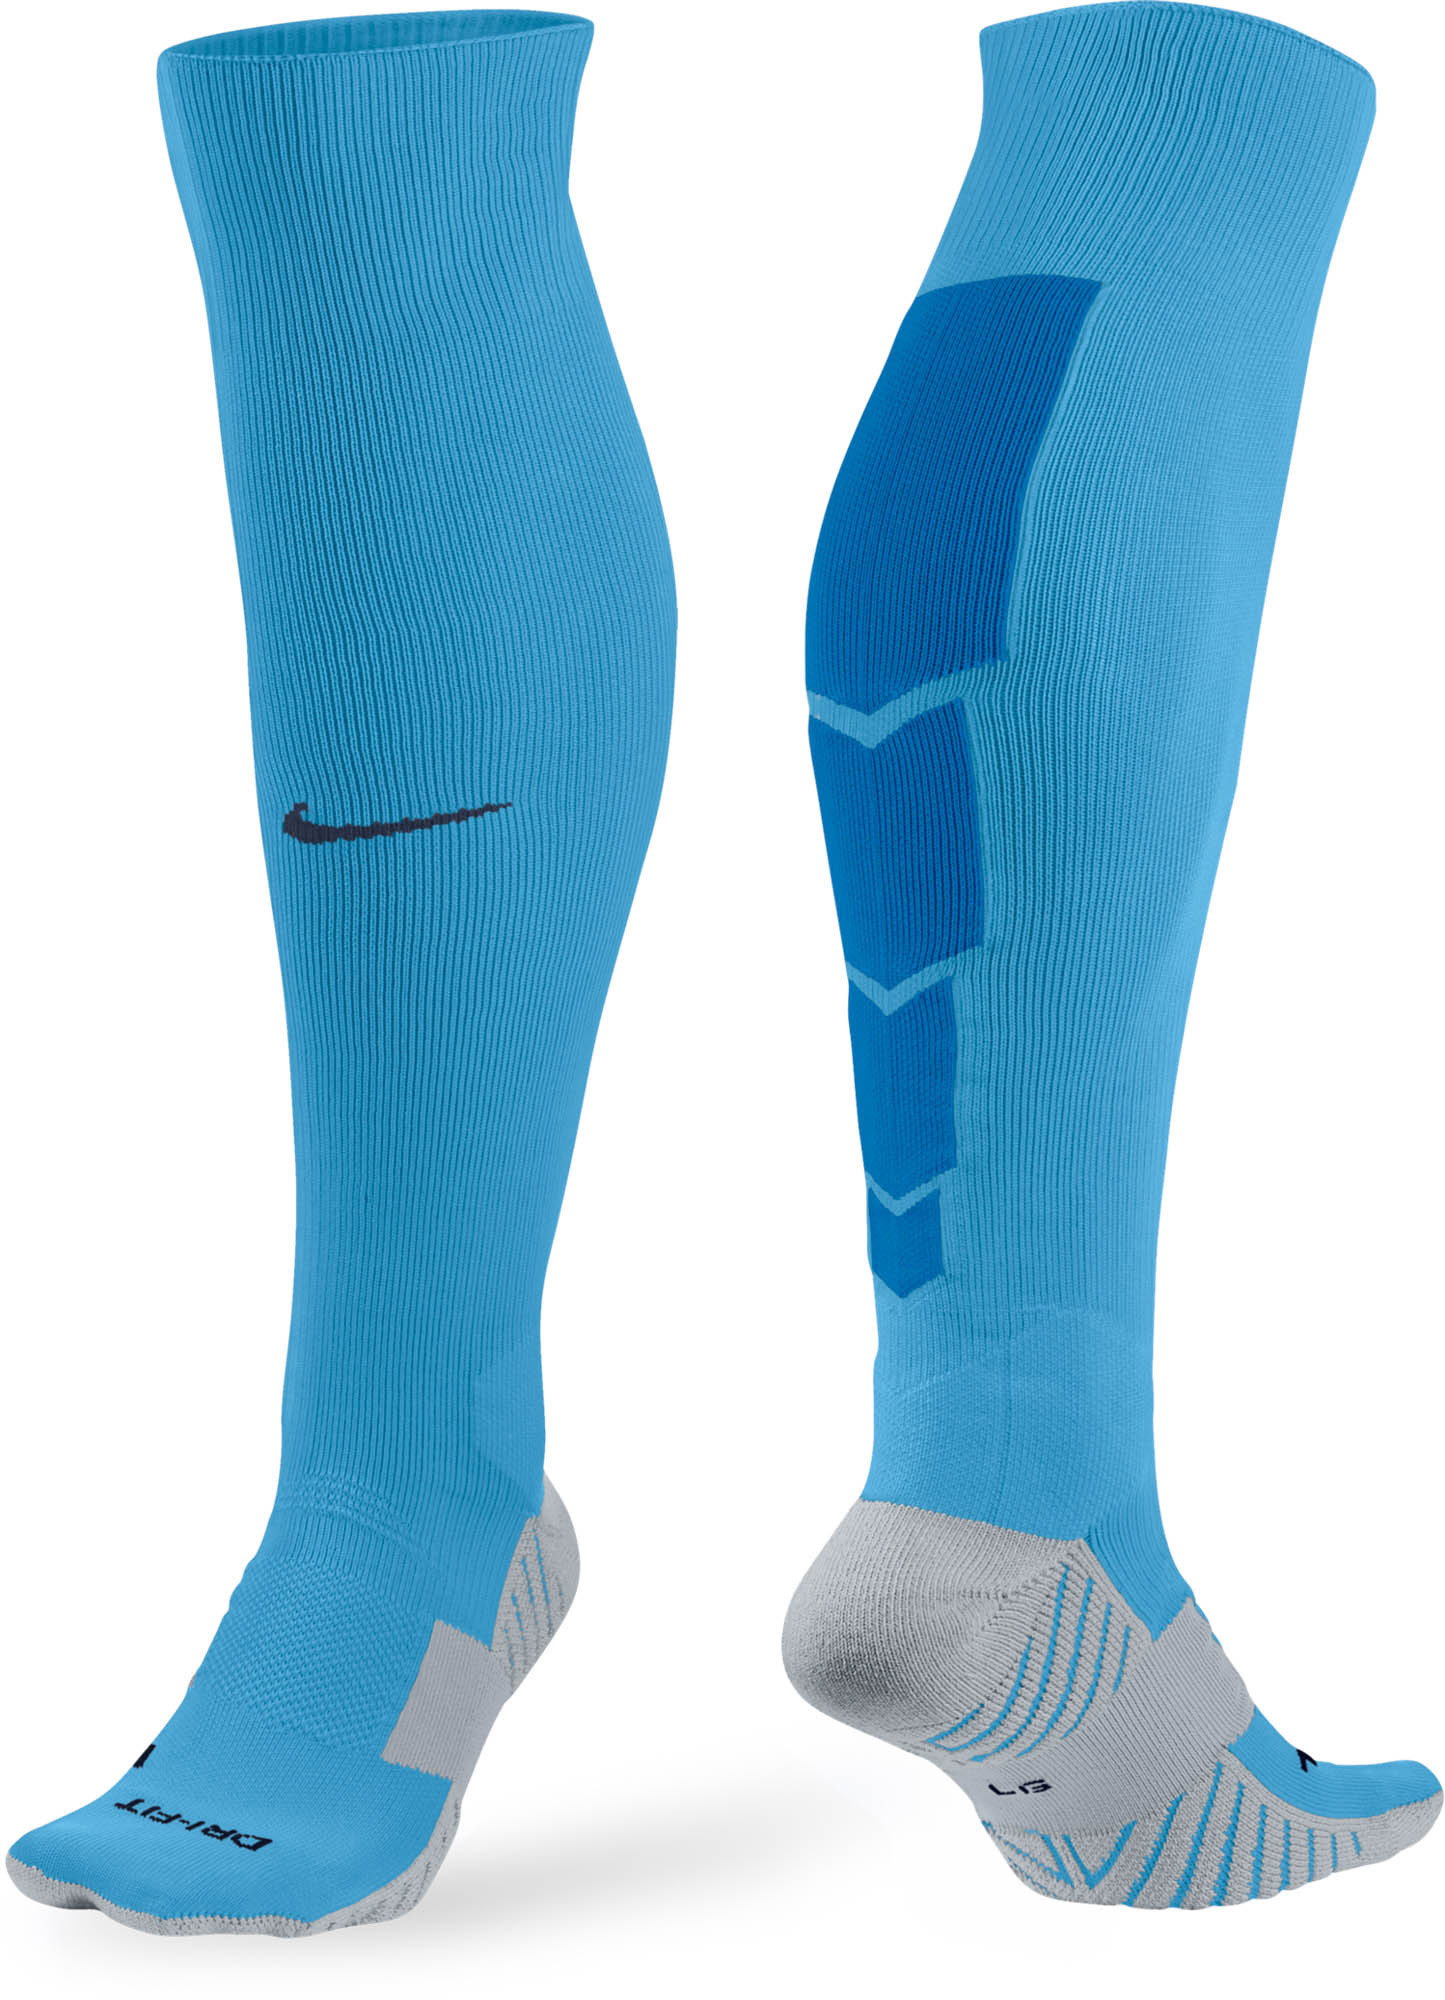 Itching For Some Soccer Socks?